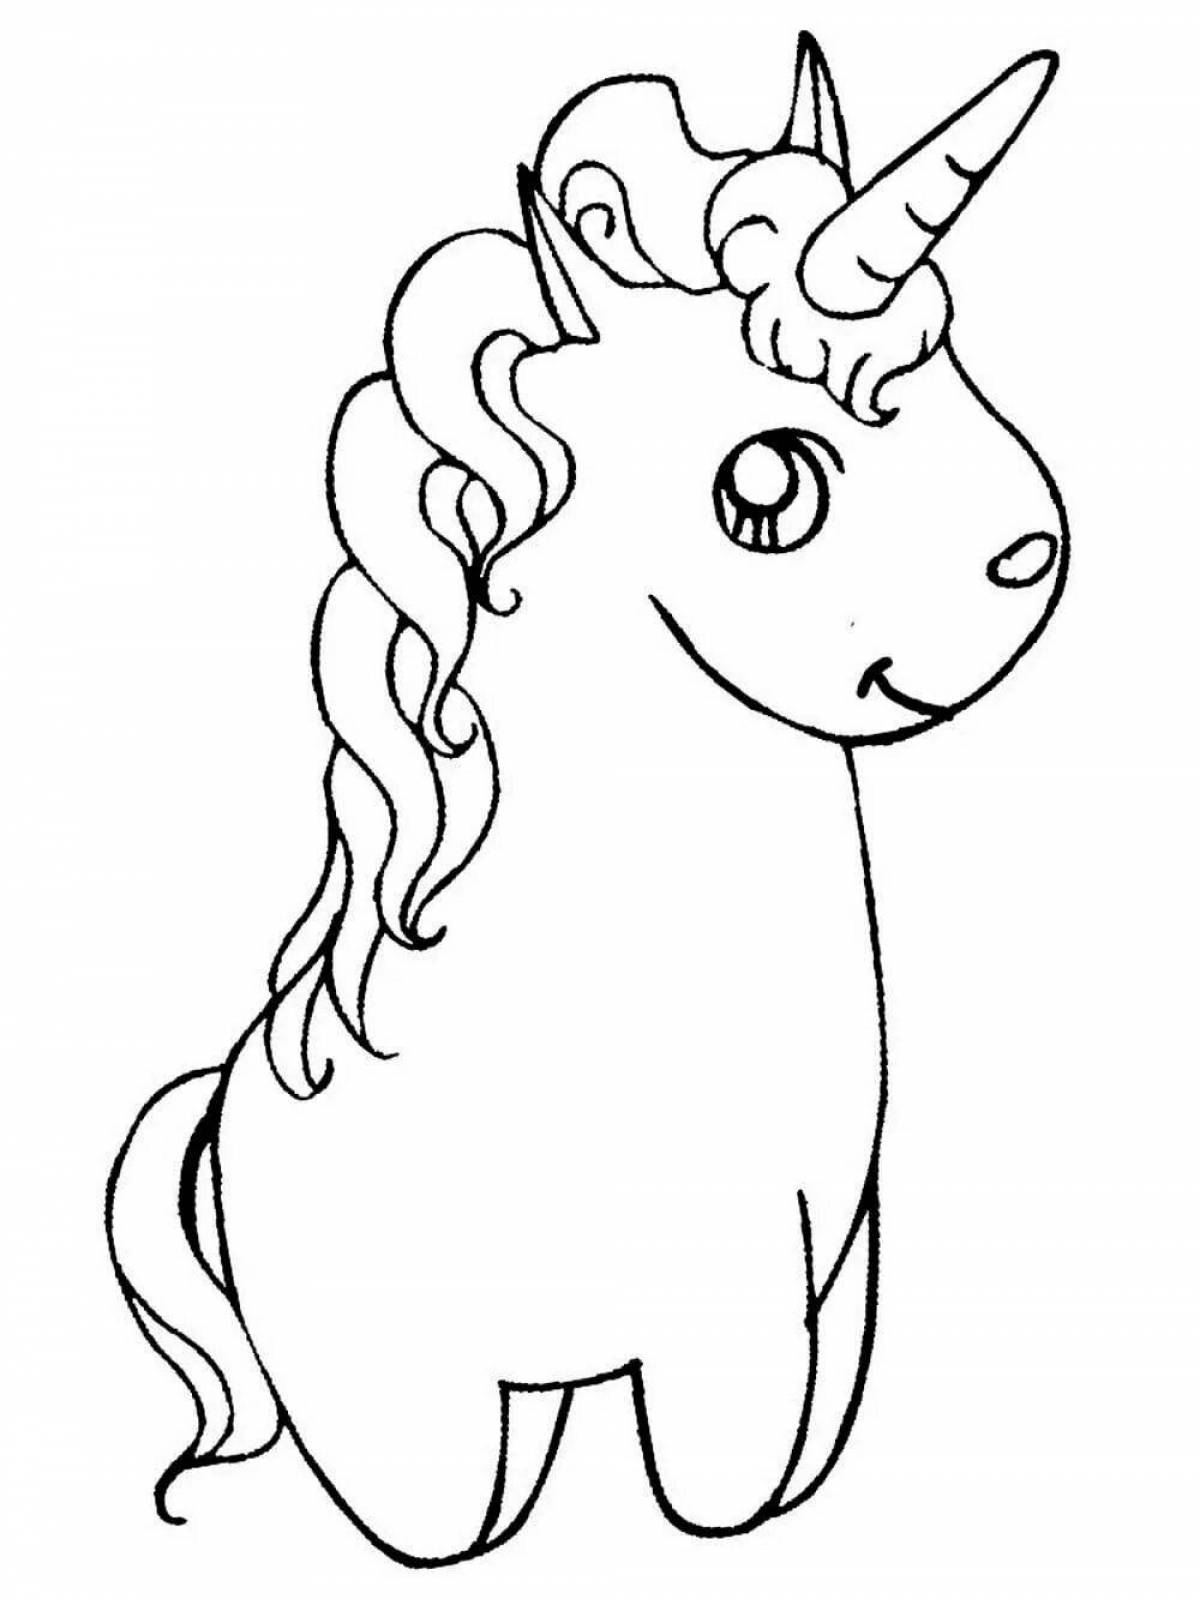 Unicorn drawing for kids #7